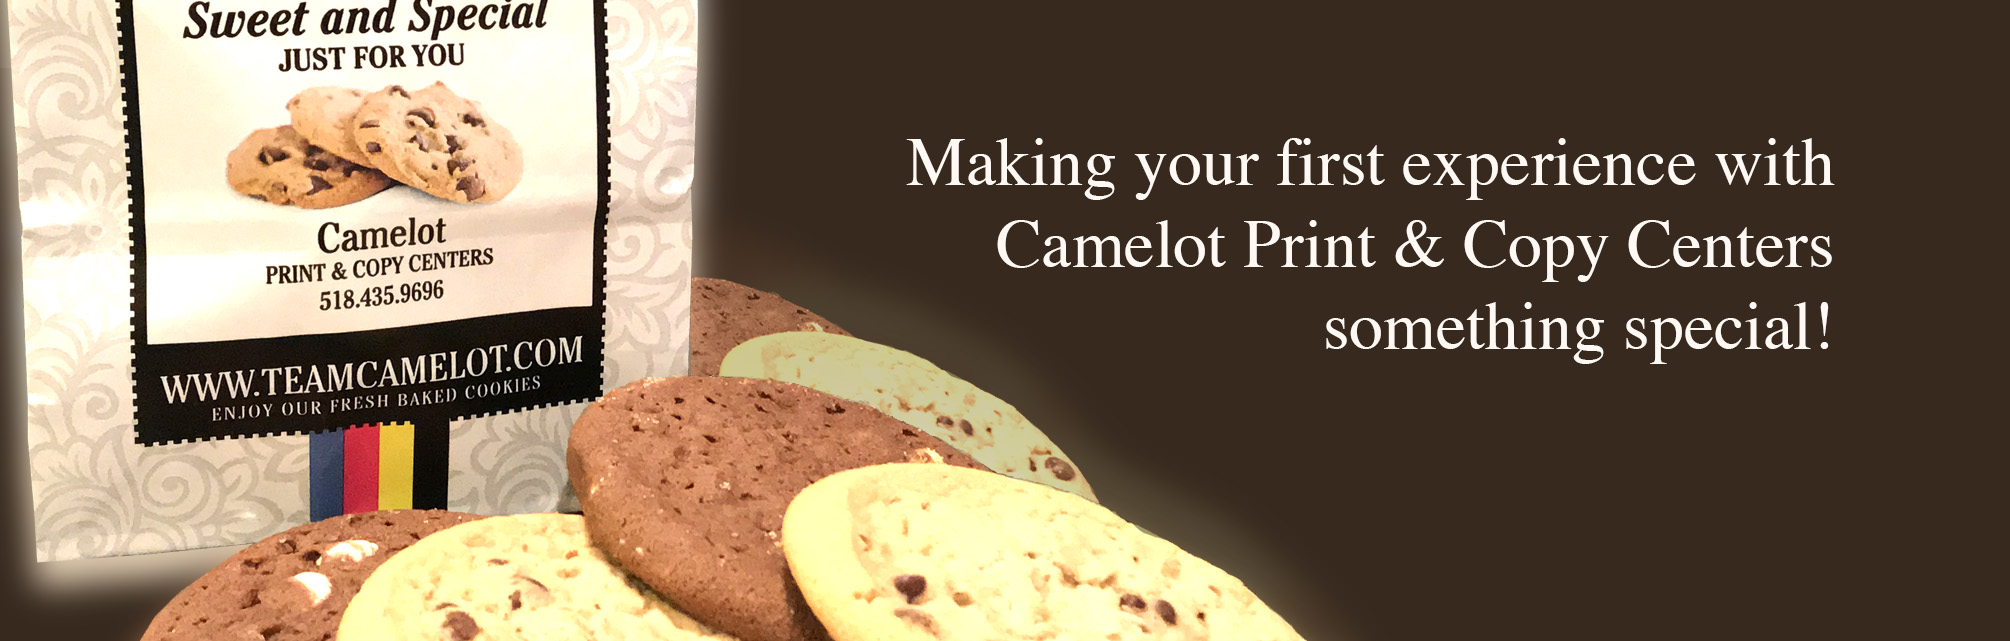 Camelot-COOKIES-Special